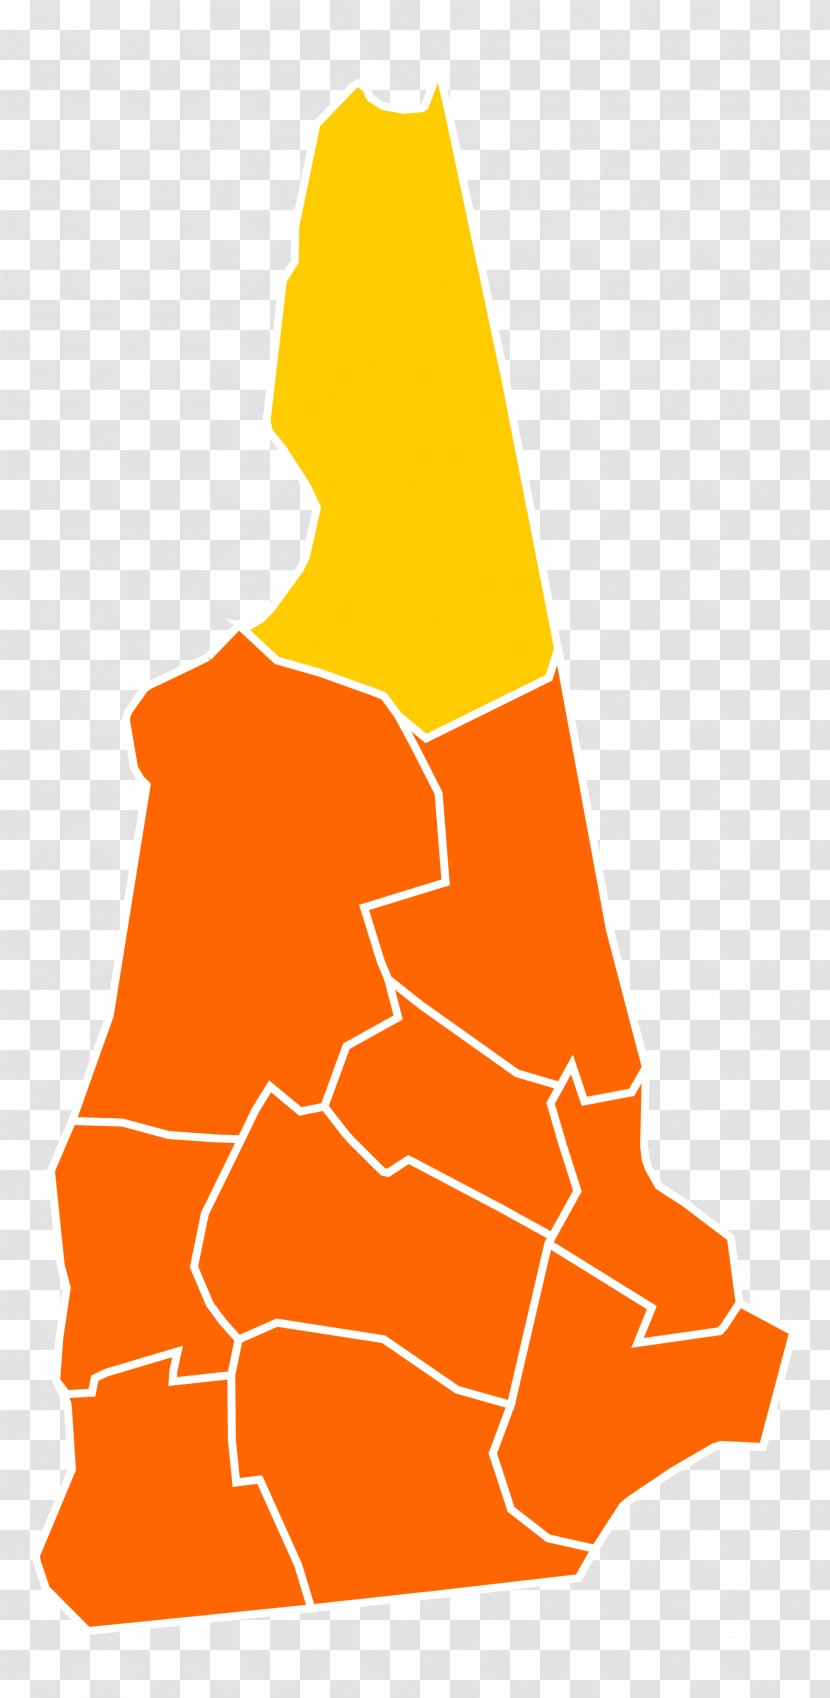 United States Presidential Election In New Hampshire, 2016 US Election, 2000 2008 - Hampshire Transparent PNG